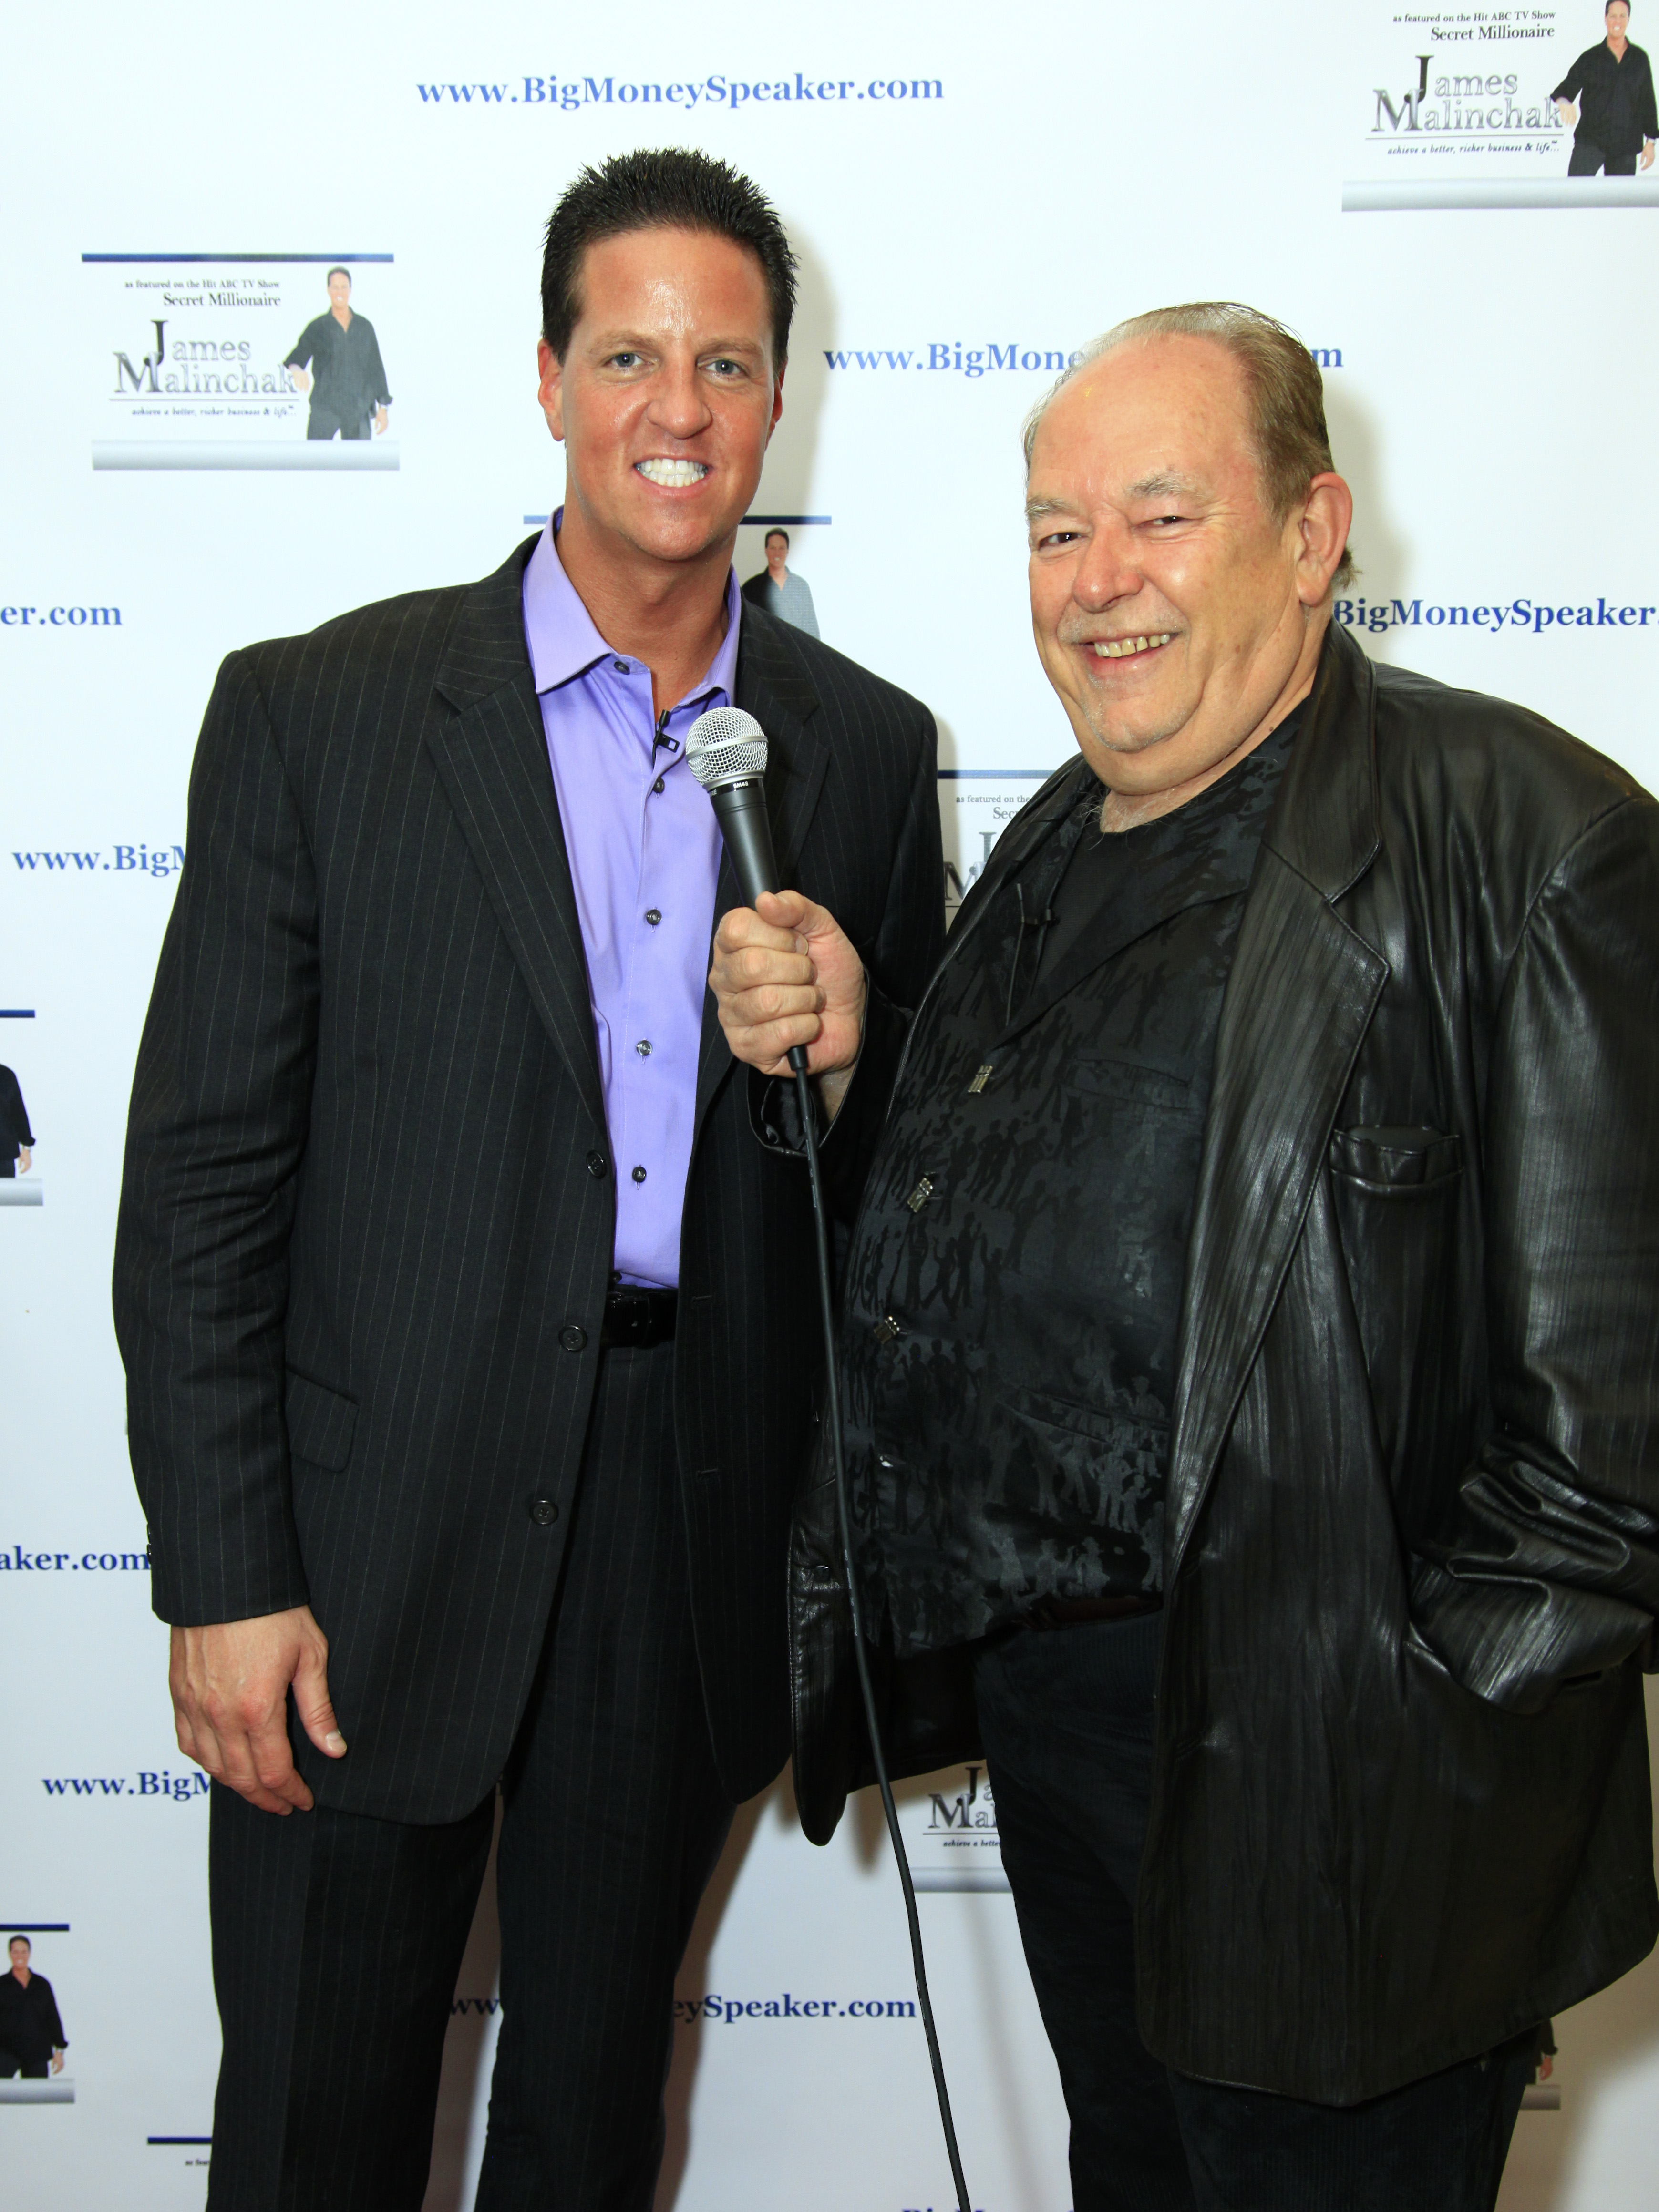 Robin Leach & James Malinchak, Featured on ABC's Hit TV Show, Secret Millionaire. James Malinchak is one of America's highest-paid, most in-demand motivational and business public speakers. He also teachers others how to become paid spkrs.